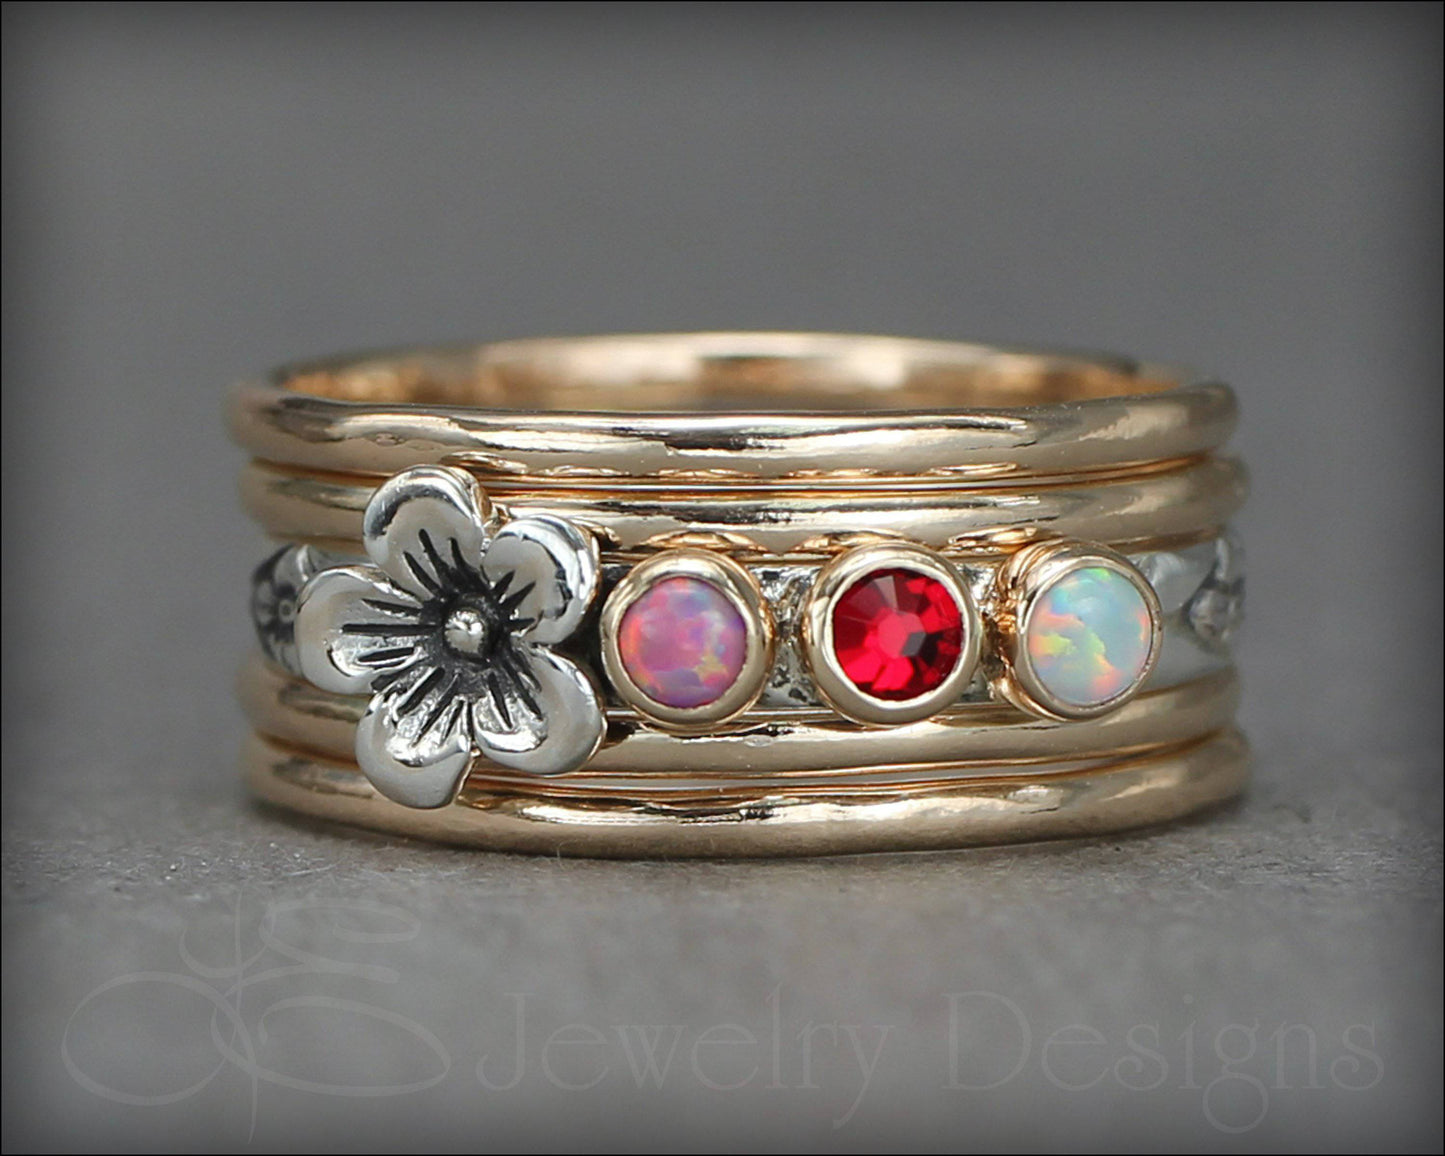 Load image into Gallery viewer, Birthstone Flower Ring Set - (choose # of stones) - LE Jewelry Designs
